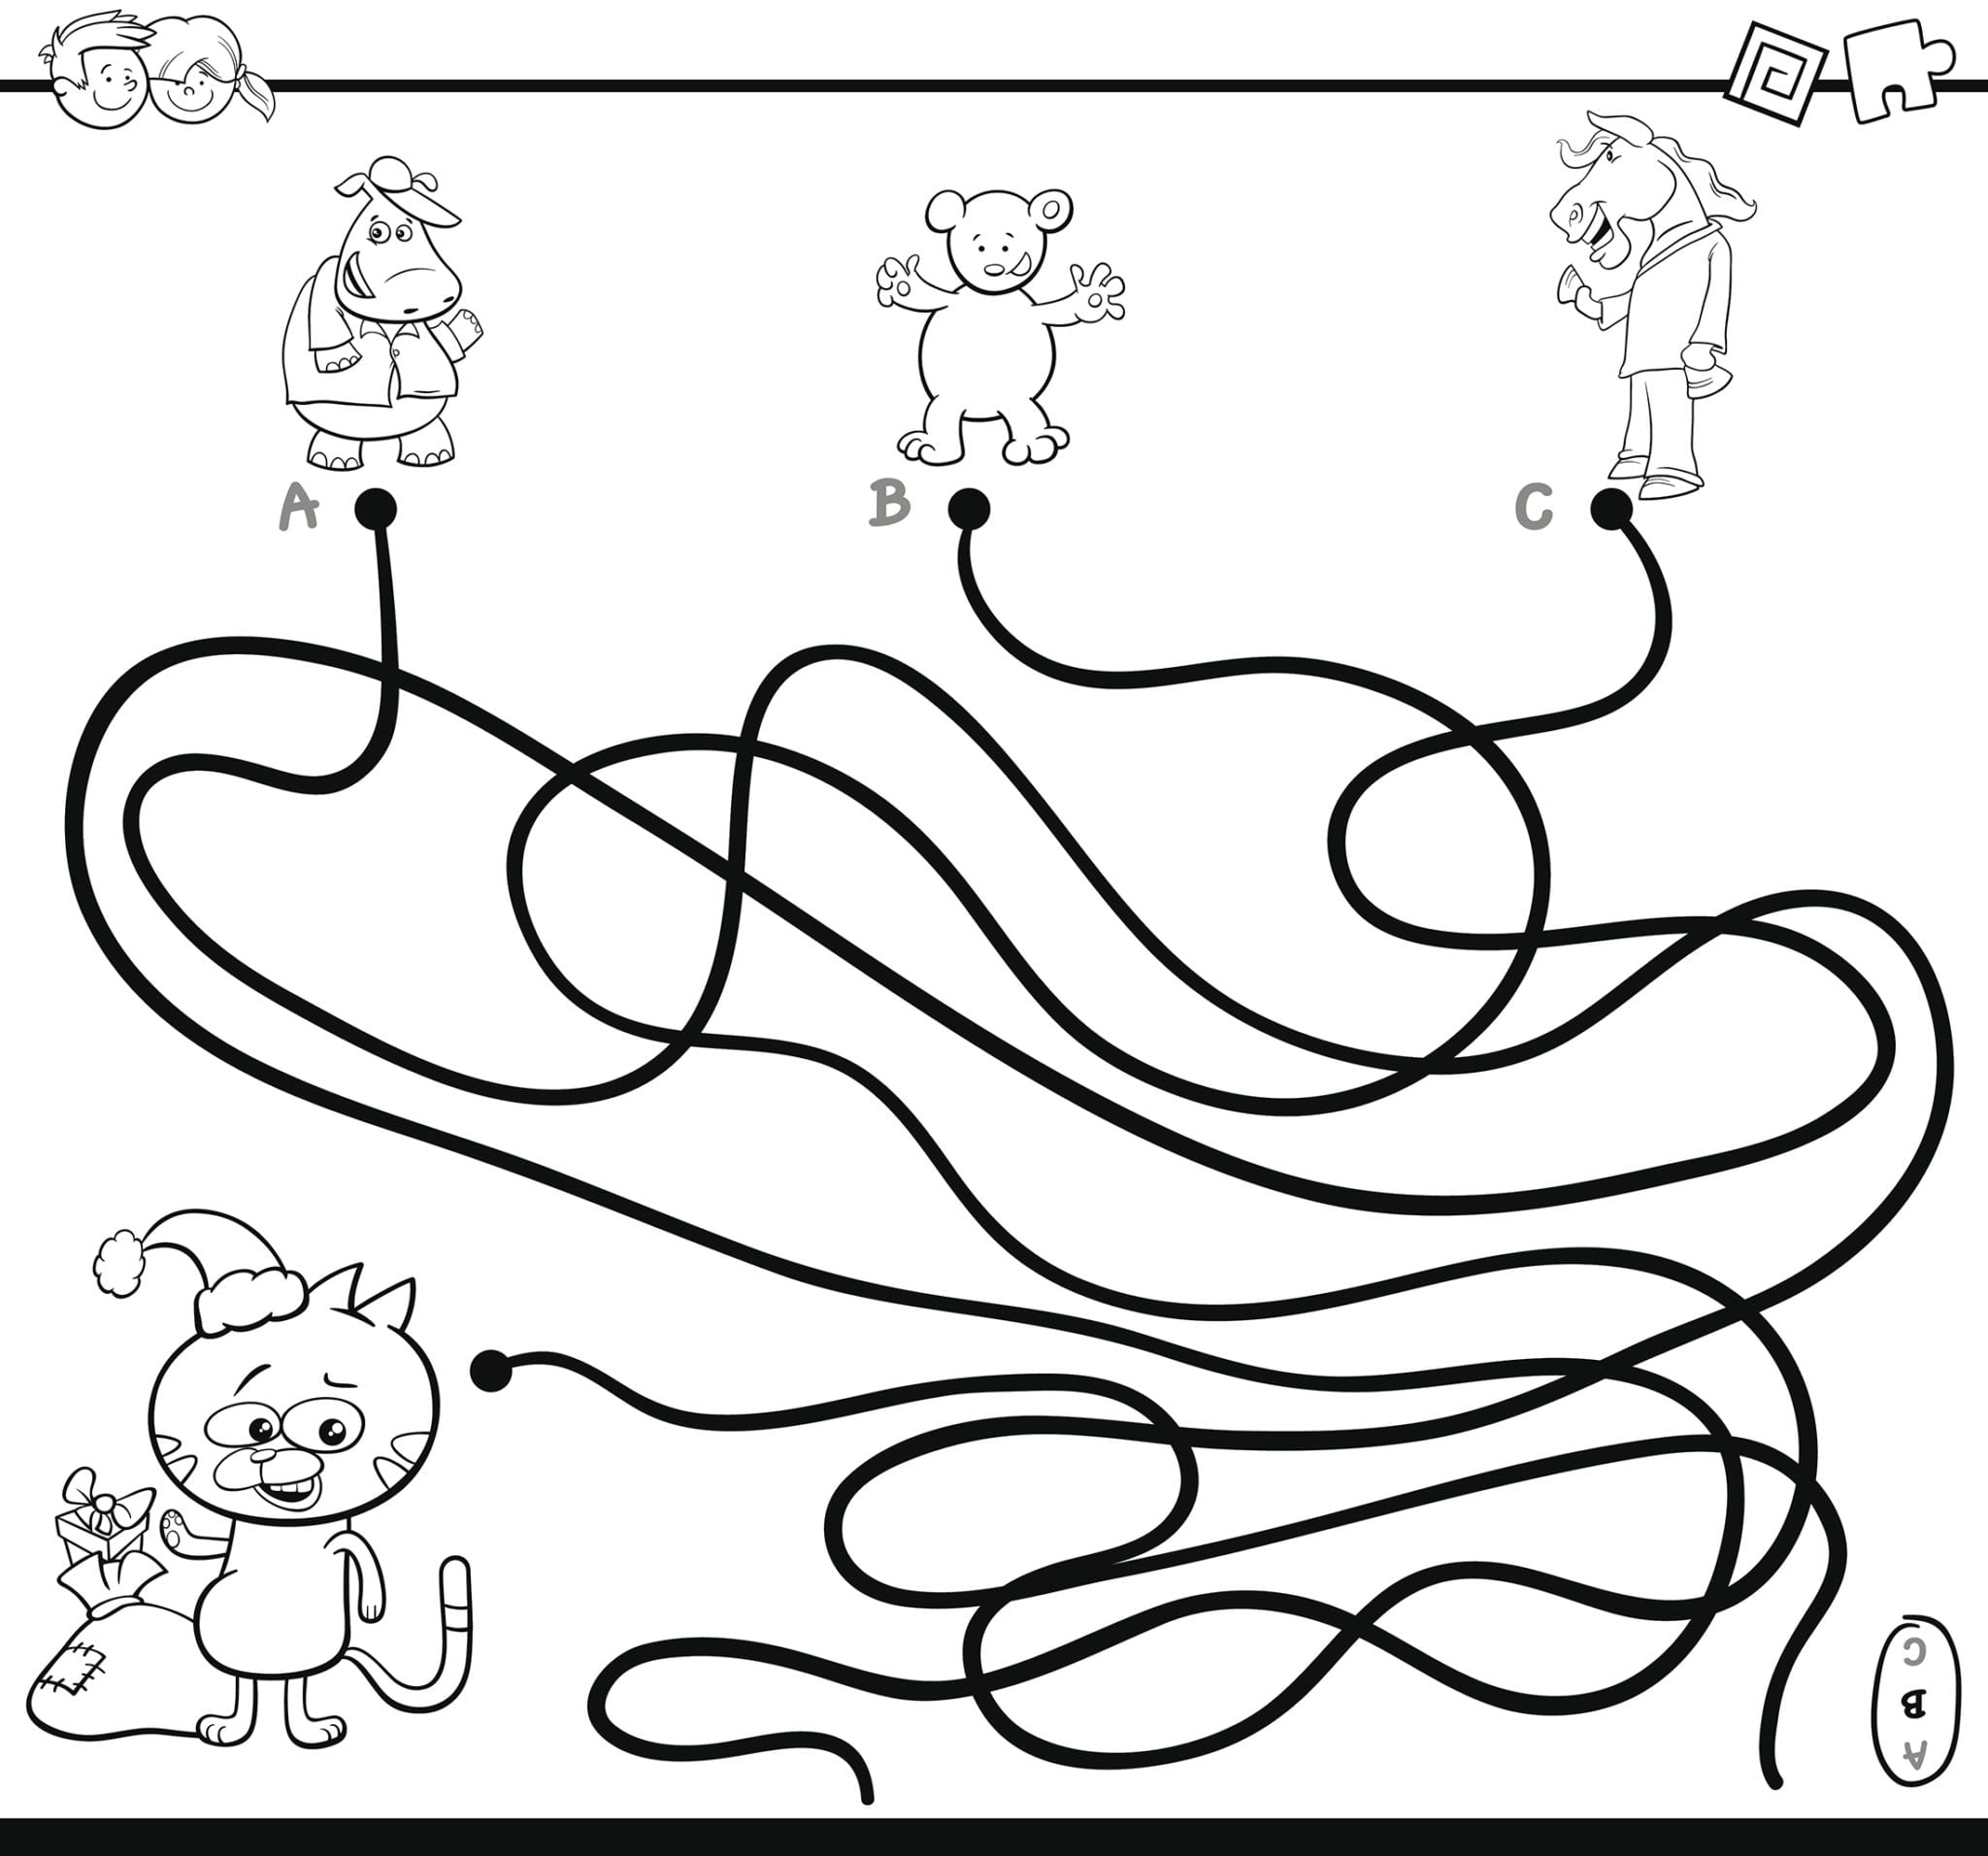 coloring page maze game